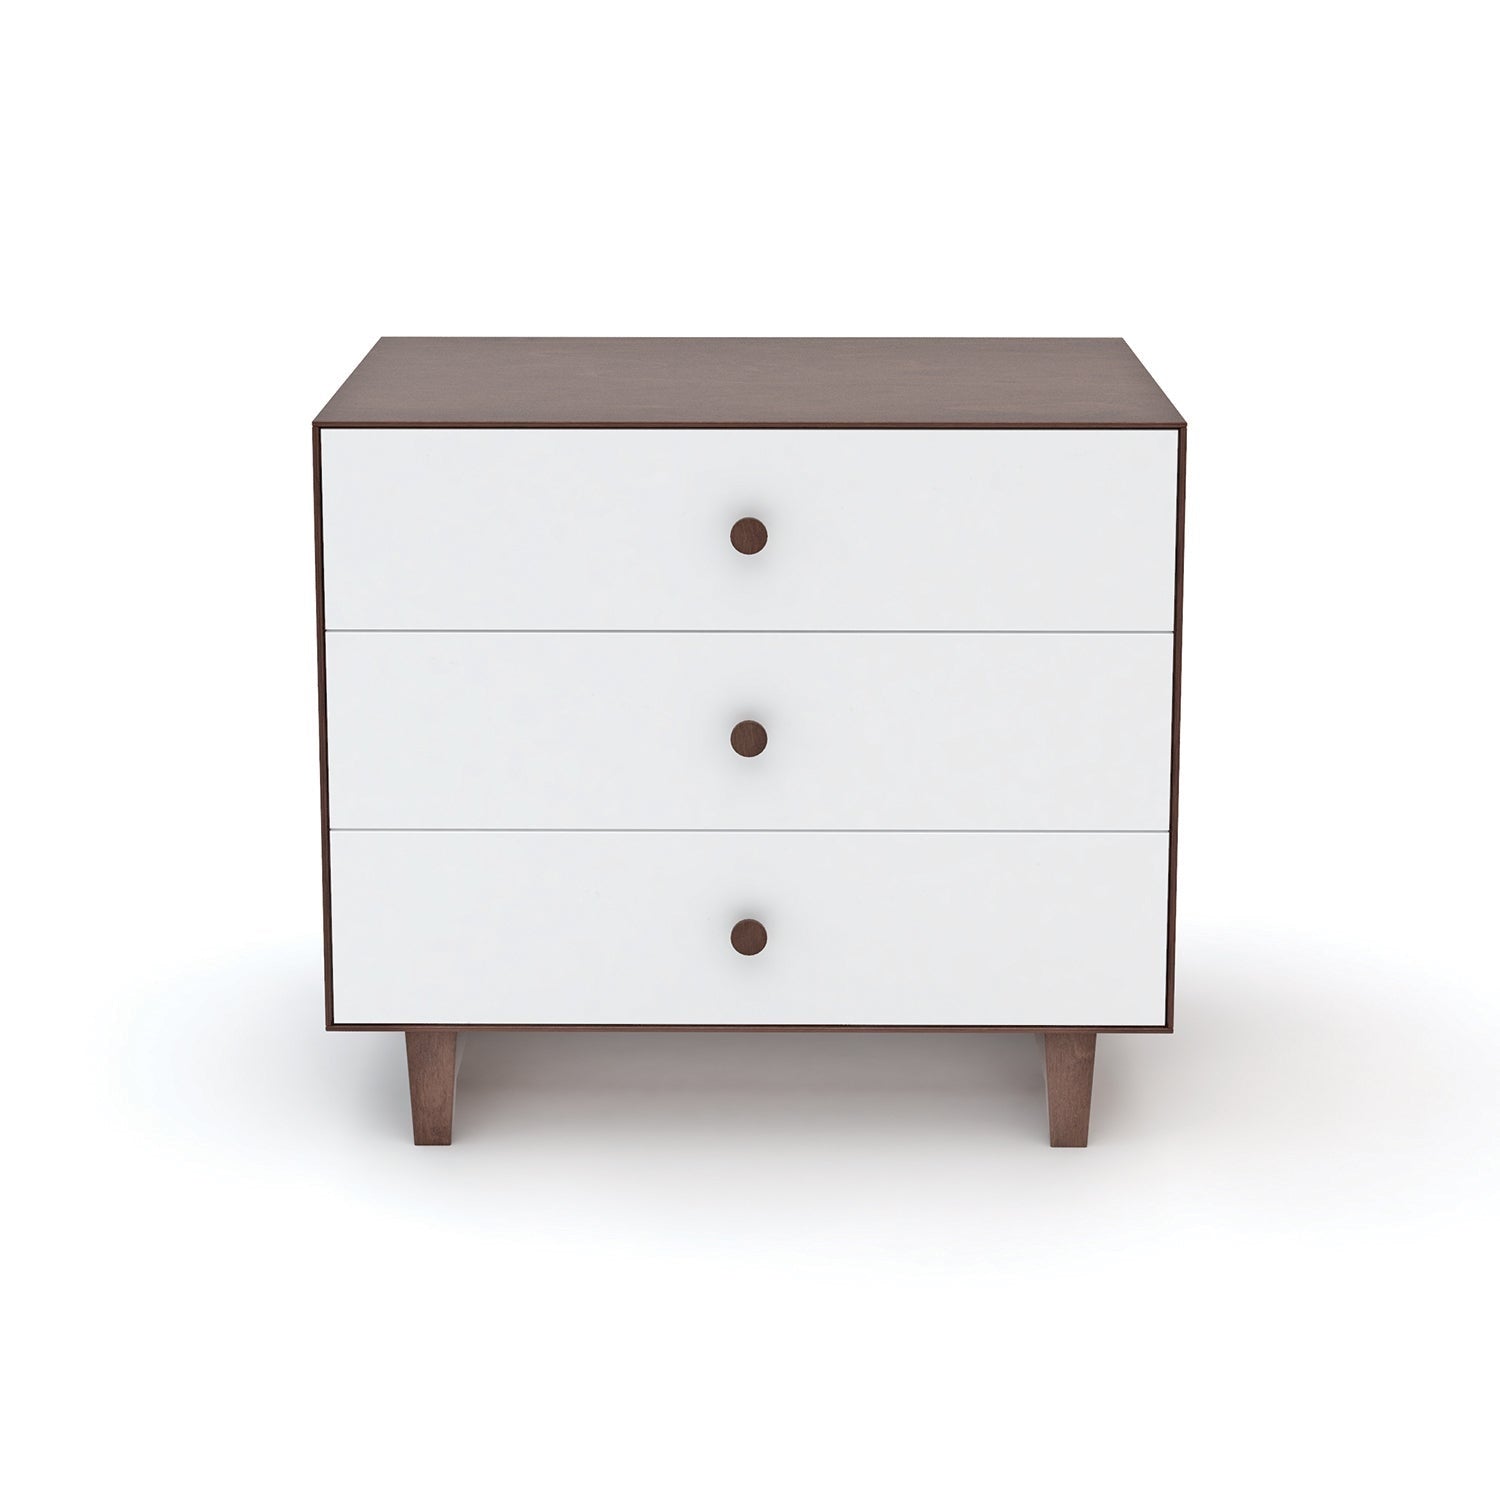 Oeuf NYC Merlin 3 Drawer Dresser - Rhea Legs (3 Colours Available)